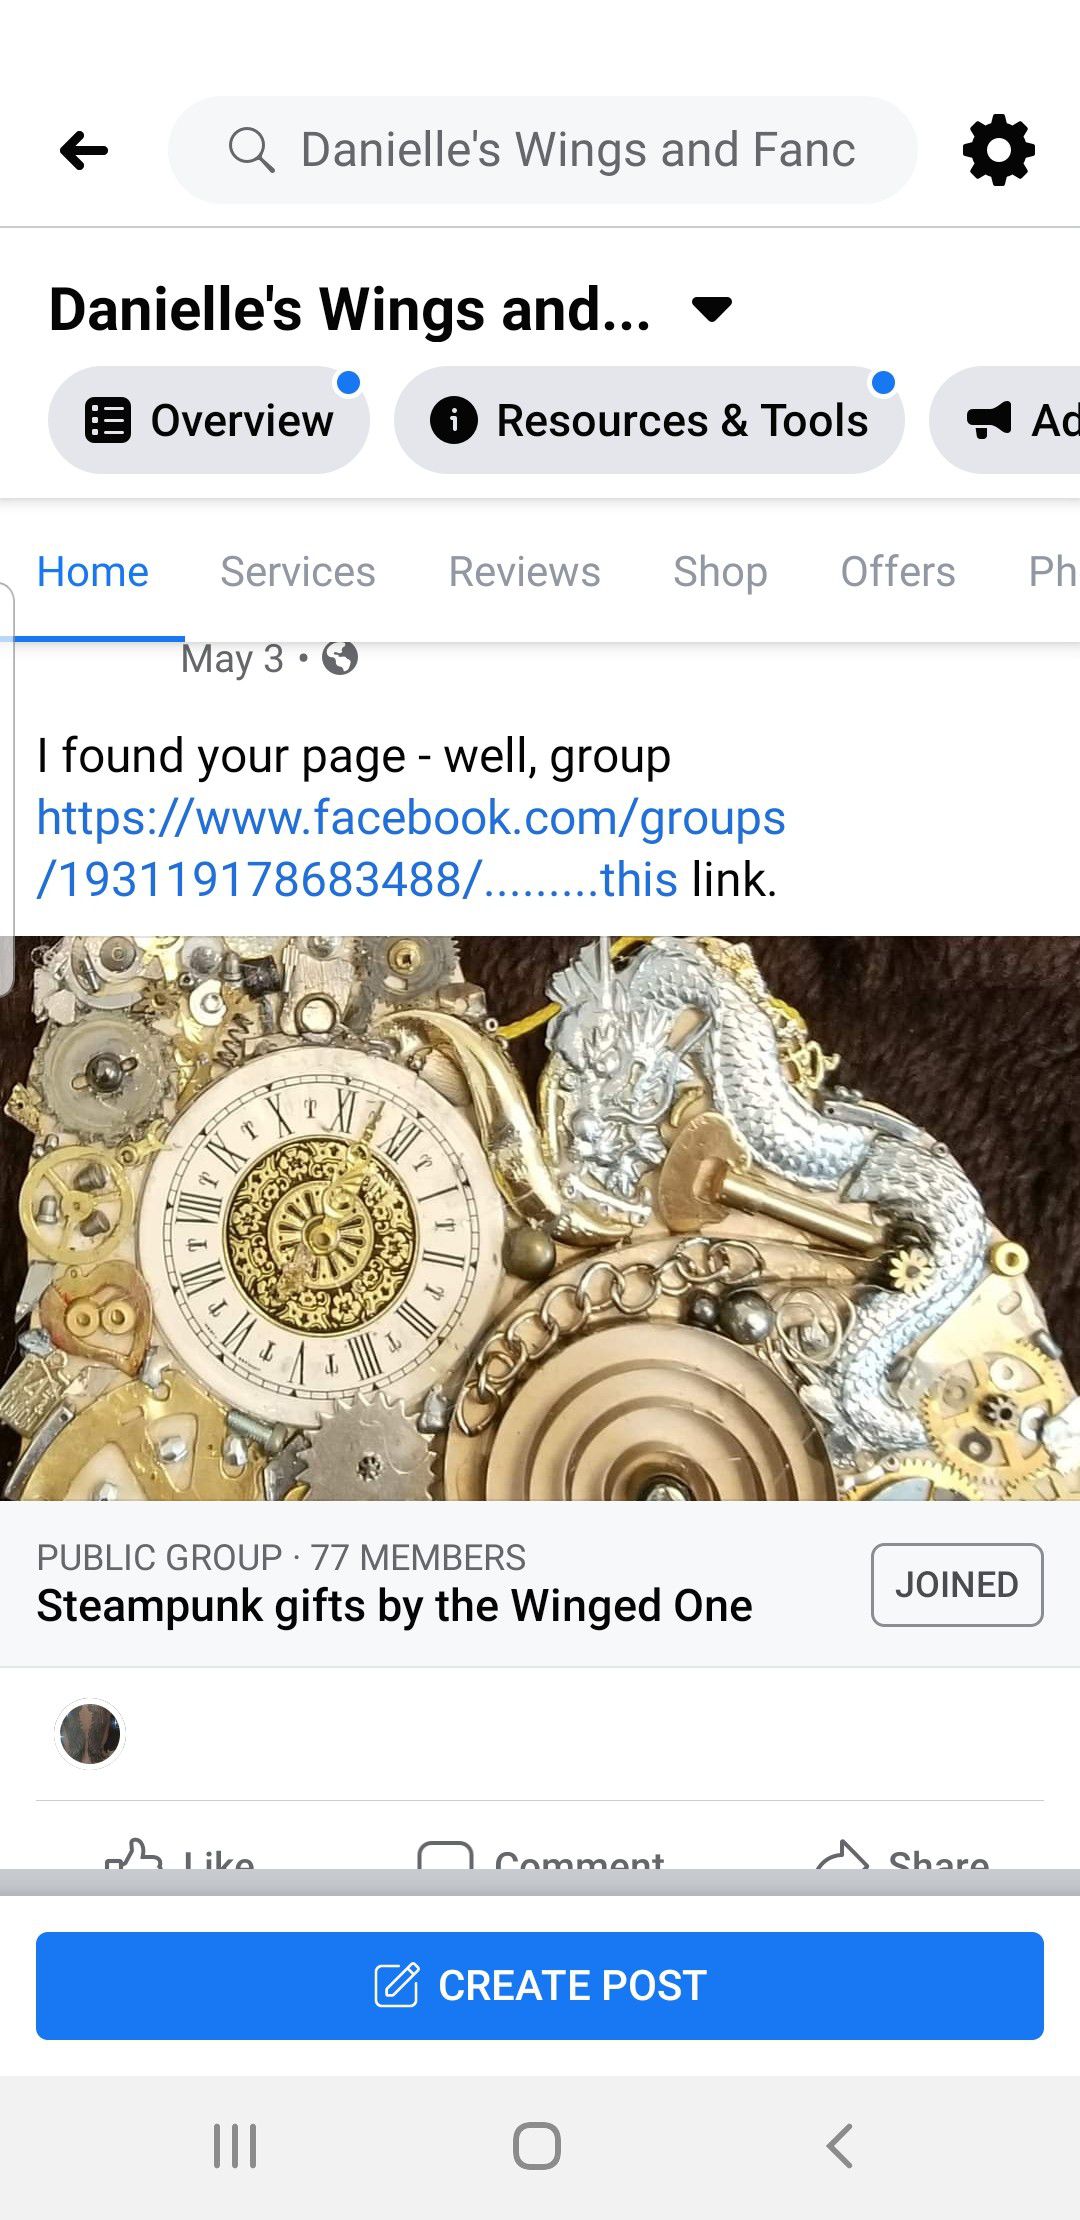 Steampunk gifts by the Winged one